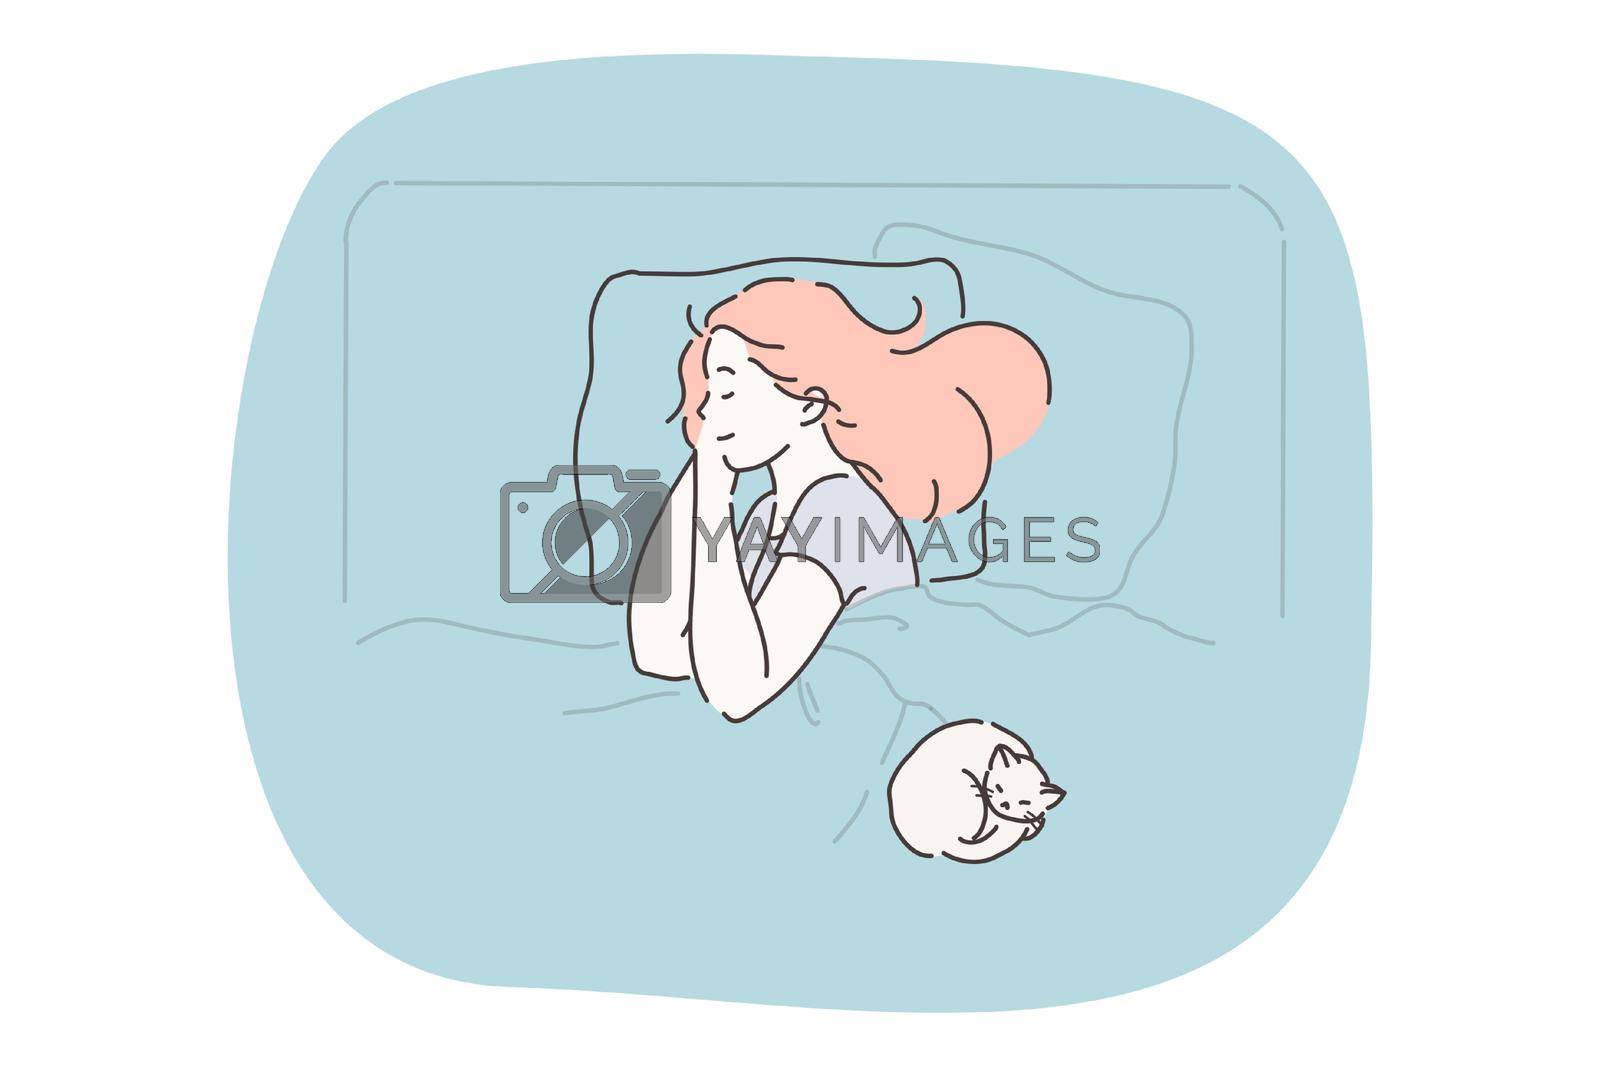 Sleeping, relaxation and comfortable rest concept. Young smiling woman cartoon character sleeping with white cat on pillow in bed under blanket at home vector illustration